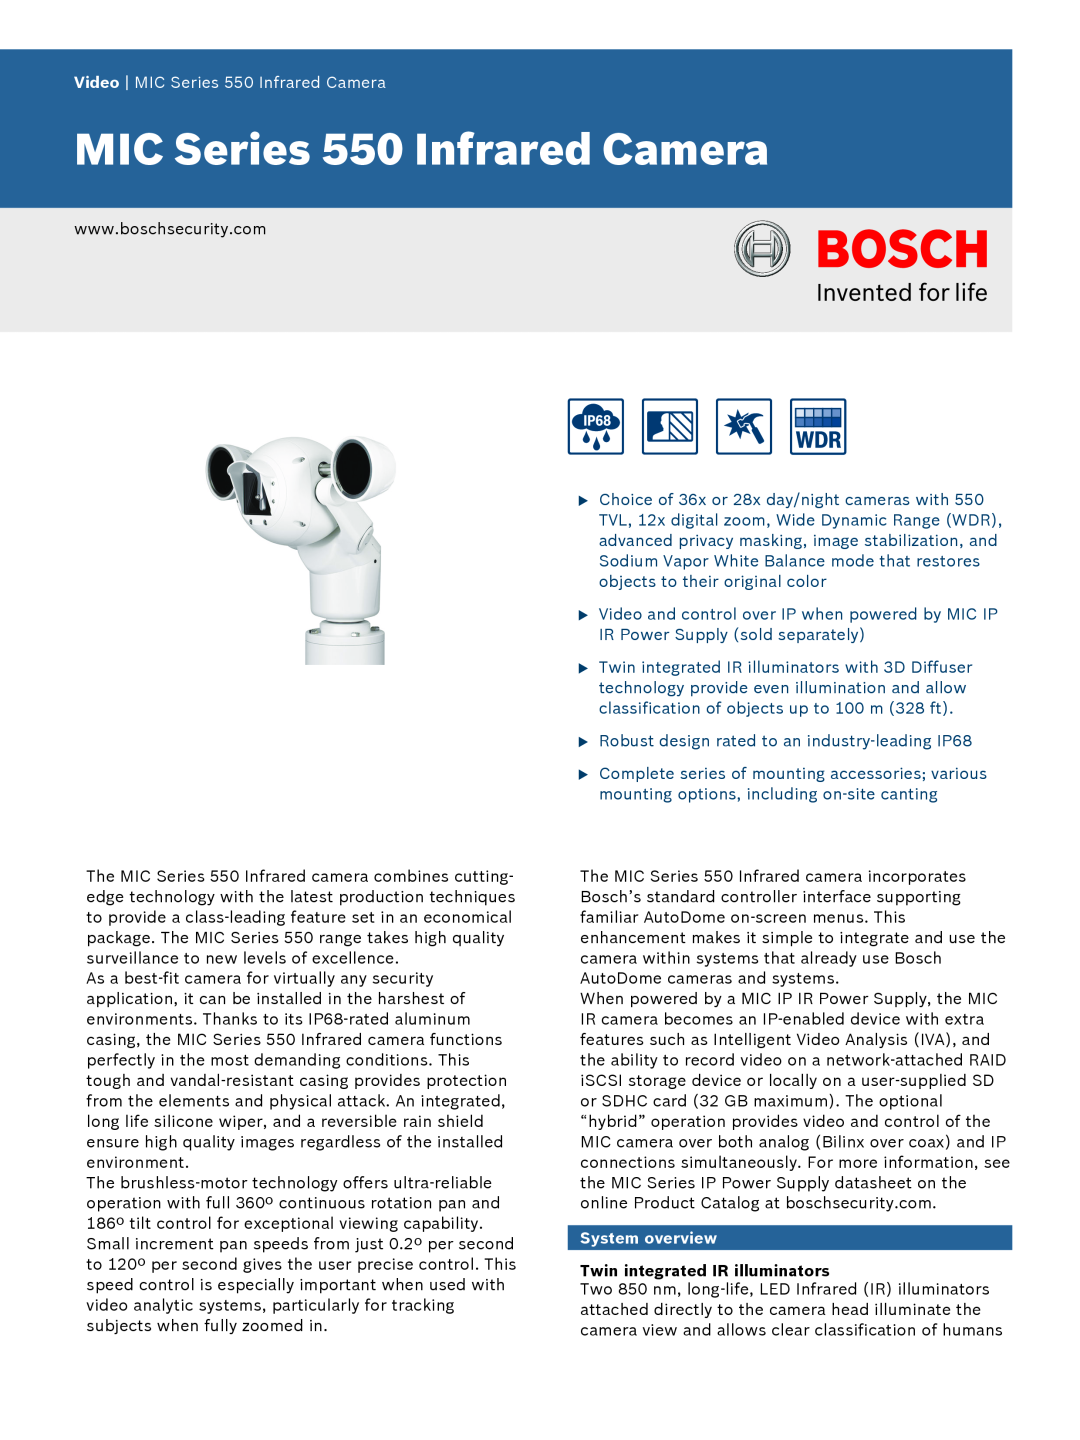 Bosch Appliances manual Video MIC Series 550 Infrared Camera, System overview, Twin integrated IR illuminators 